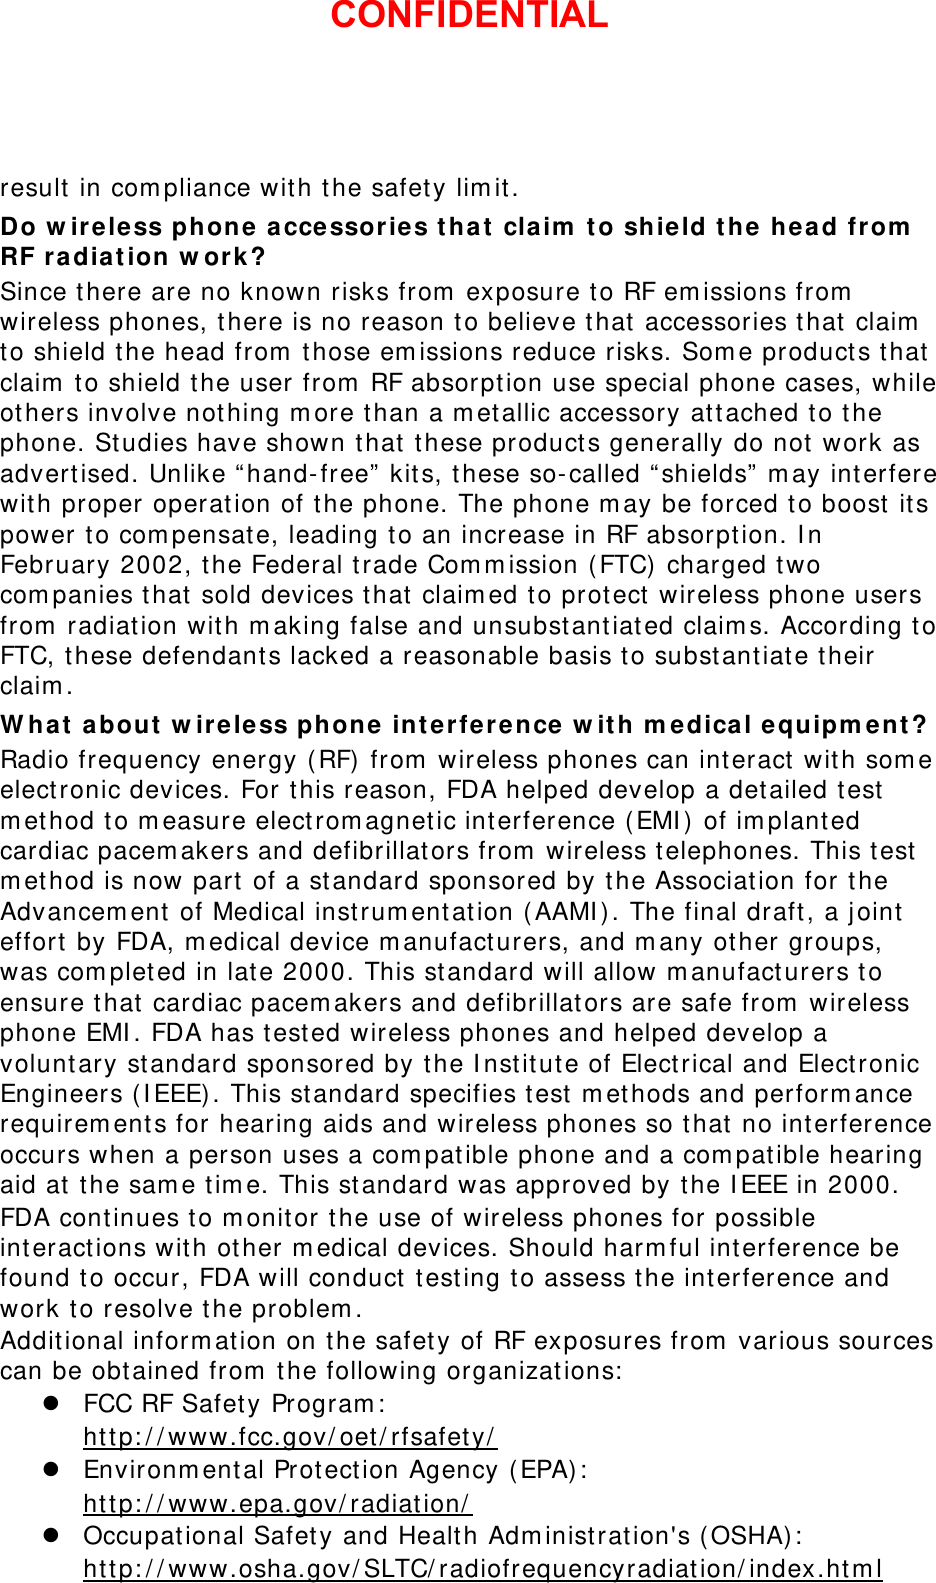 result in compliance with the safety limit. Do wireless phone accessories that claim to shield the head from RF radiation work? Since there are no known risks from exposure to RF emissions from wireless phones, there is no reason to believe that accessories that claim to shield the head from those emissions reduce risks. Some products that claim to shield the user from RF absorption use special phone cases, while others involve nothing more than a metallic accessory attached to the phone. Studies have shown that these products generally do not work as advertised. Unlike “hand-free” kits, these so-called “shields” may interfere with proper operation of the phone. The phone may be forced to boost its power to compensate, leading to an increase in RF absorption. In February 2002, the Federal trade Commission (FTC) charged two companies that sold devices that claimed to protect wireless phone users from radiation with making false and unsubstantiated claims. According to FTC, these defendants lacked a reasonable basis to substantiate their claim. What about wireless phone interference with medical equipment? Radio frequency energy (RF) from wireless phones can interact with some electronic devices. For this reason, FDA helped develop a detailed test method to measure electromagnetic interference (EMI) of implanted cardiac pacemakers and defibrillators from wireless telephones. This test method is now part of a standard sponsored by the Association for the Advancement of Medical instrumentation (AAMI). The final draft, a joint effort by FDA, medical device manufacturers, and many other groups, was completed in late 2000. This standard will allow manufacturers to ensure that cardiac pacemakers and defibrillators are safe from wireless phone EMI. FDA has tested wireless phones and helped develop a voluntary standard sponsored by the Institute of Electrical and Electronic Engineers (IEEE). This standard specifies test methods and performance requirements for hearing aids and wireless phones so that no interference occurs when a person uses a compatible phone and a compatible hearing aid at the same time. This standard was approved by the IEEE in 2000. FDA continues to monitor the use of wireless phones for possible interactions with other medical devices. Should harmful interference be found to occur, FDA will conduct testing to assess the interference and work to resolve the problem. Additional information on the safety of RF exposures from various sources can be obtained from the following organizations:  FCC RF Safety Program:  http://www.fcc.gov/oet/rfsafety/  Environmental Protection Agency (EPA):  http://www.epa.gov/radiation/  Occupational Safety and Health Administration&apos;s (OSHA):        http://www.osha.gov/SLTC/radiofrequencyradiation/index.html CONFIDENTIAL